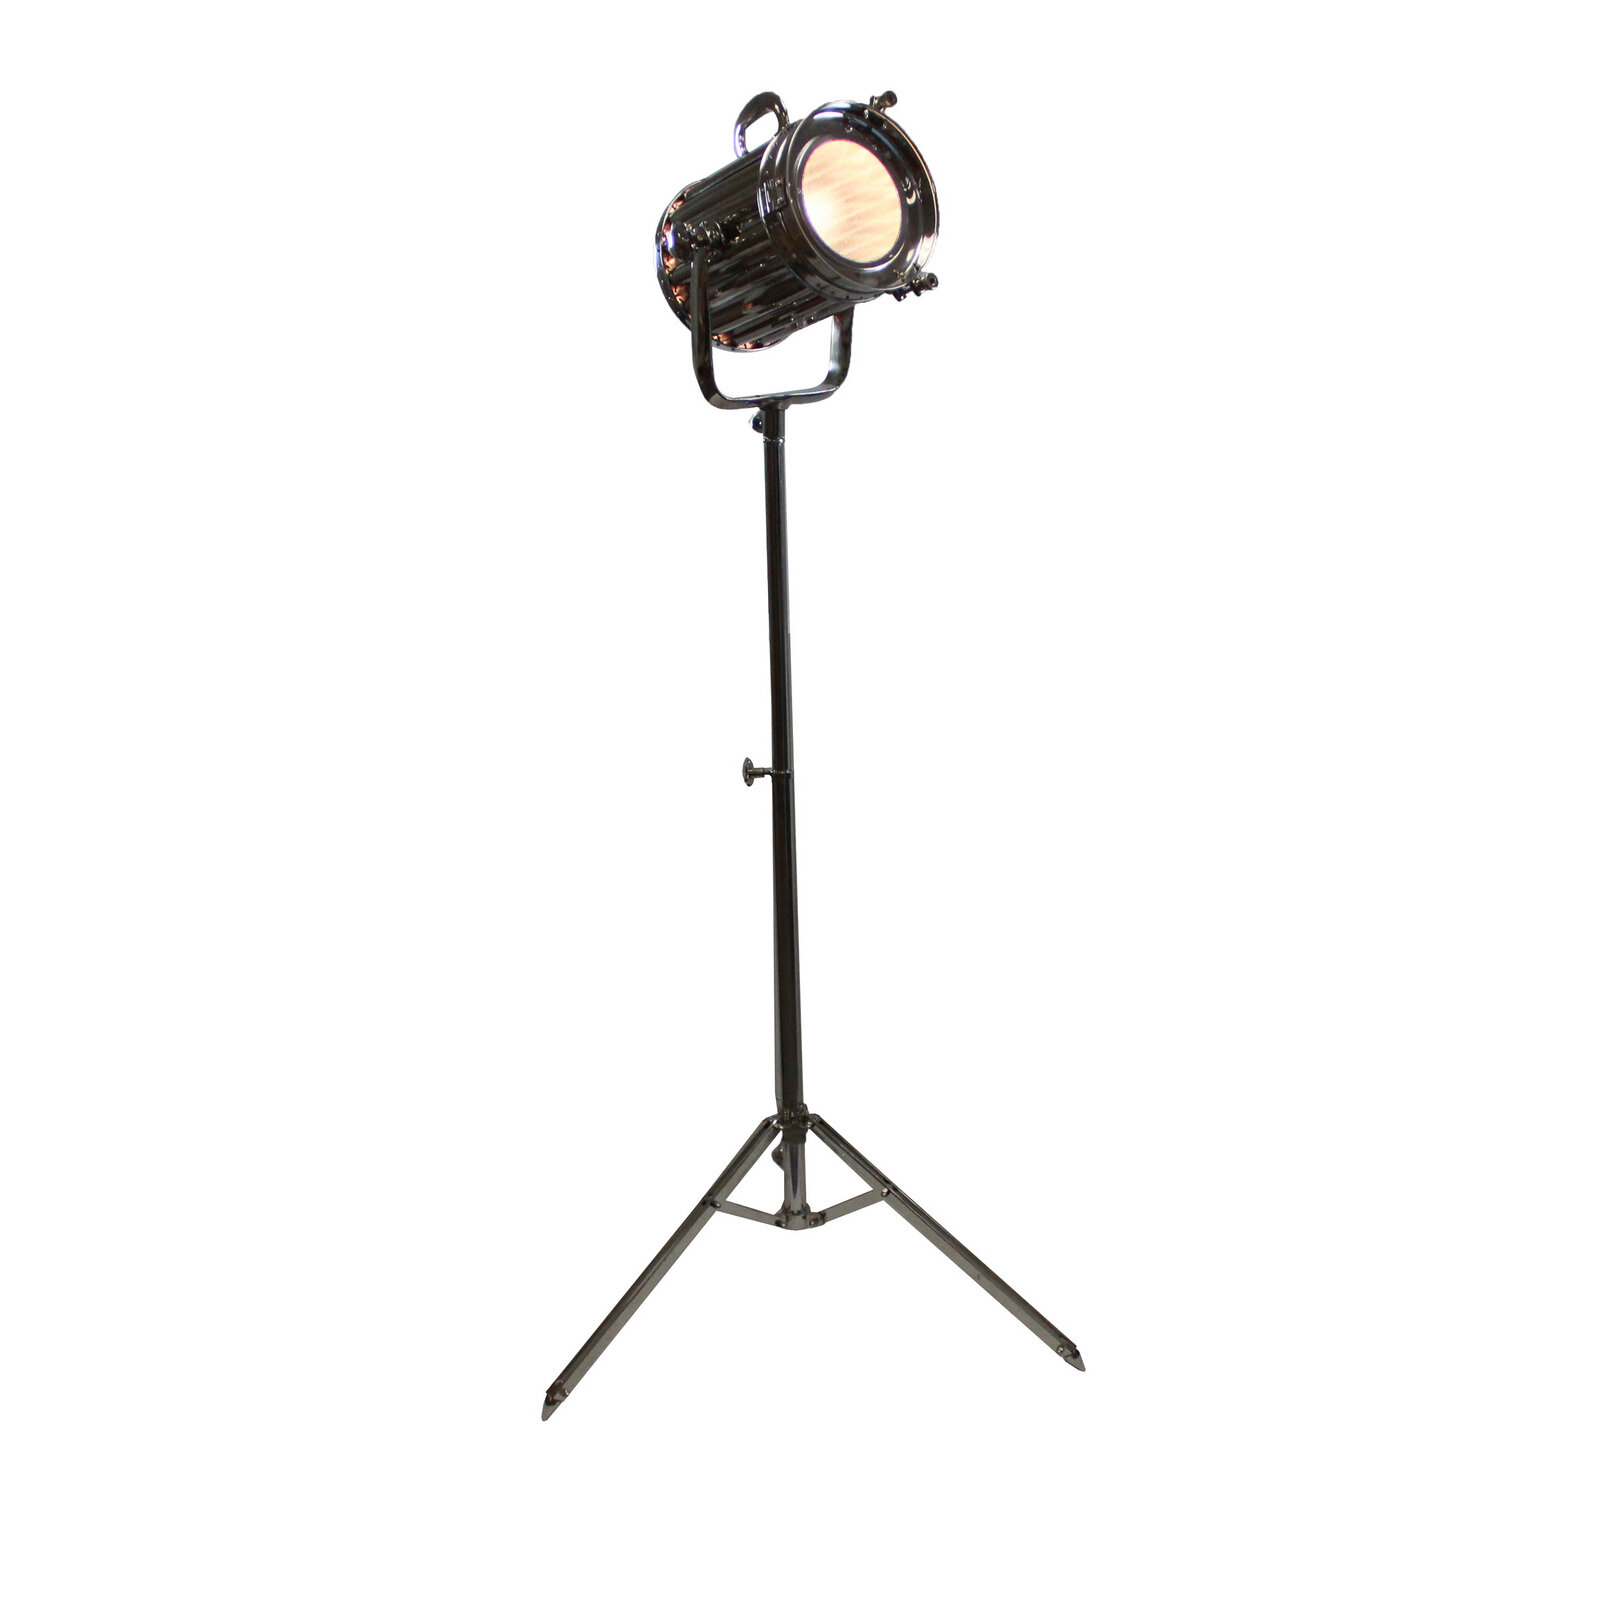 Details About 17 Stories Cruse Round Cinema Studio Spotlight 71 Led Tripod Floor Lamp in size 1600 X 1600